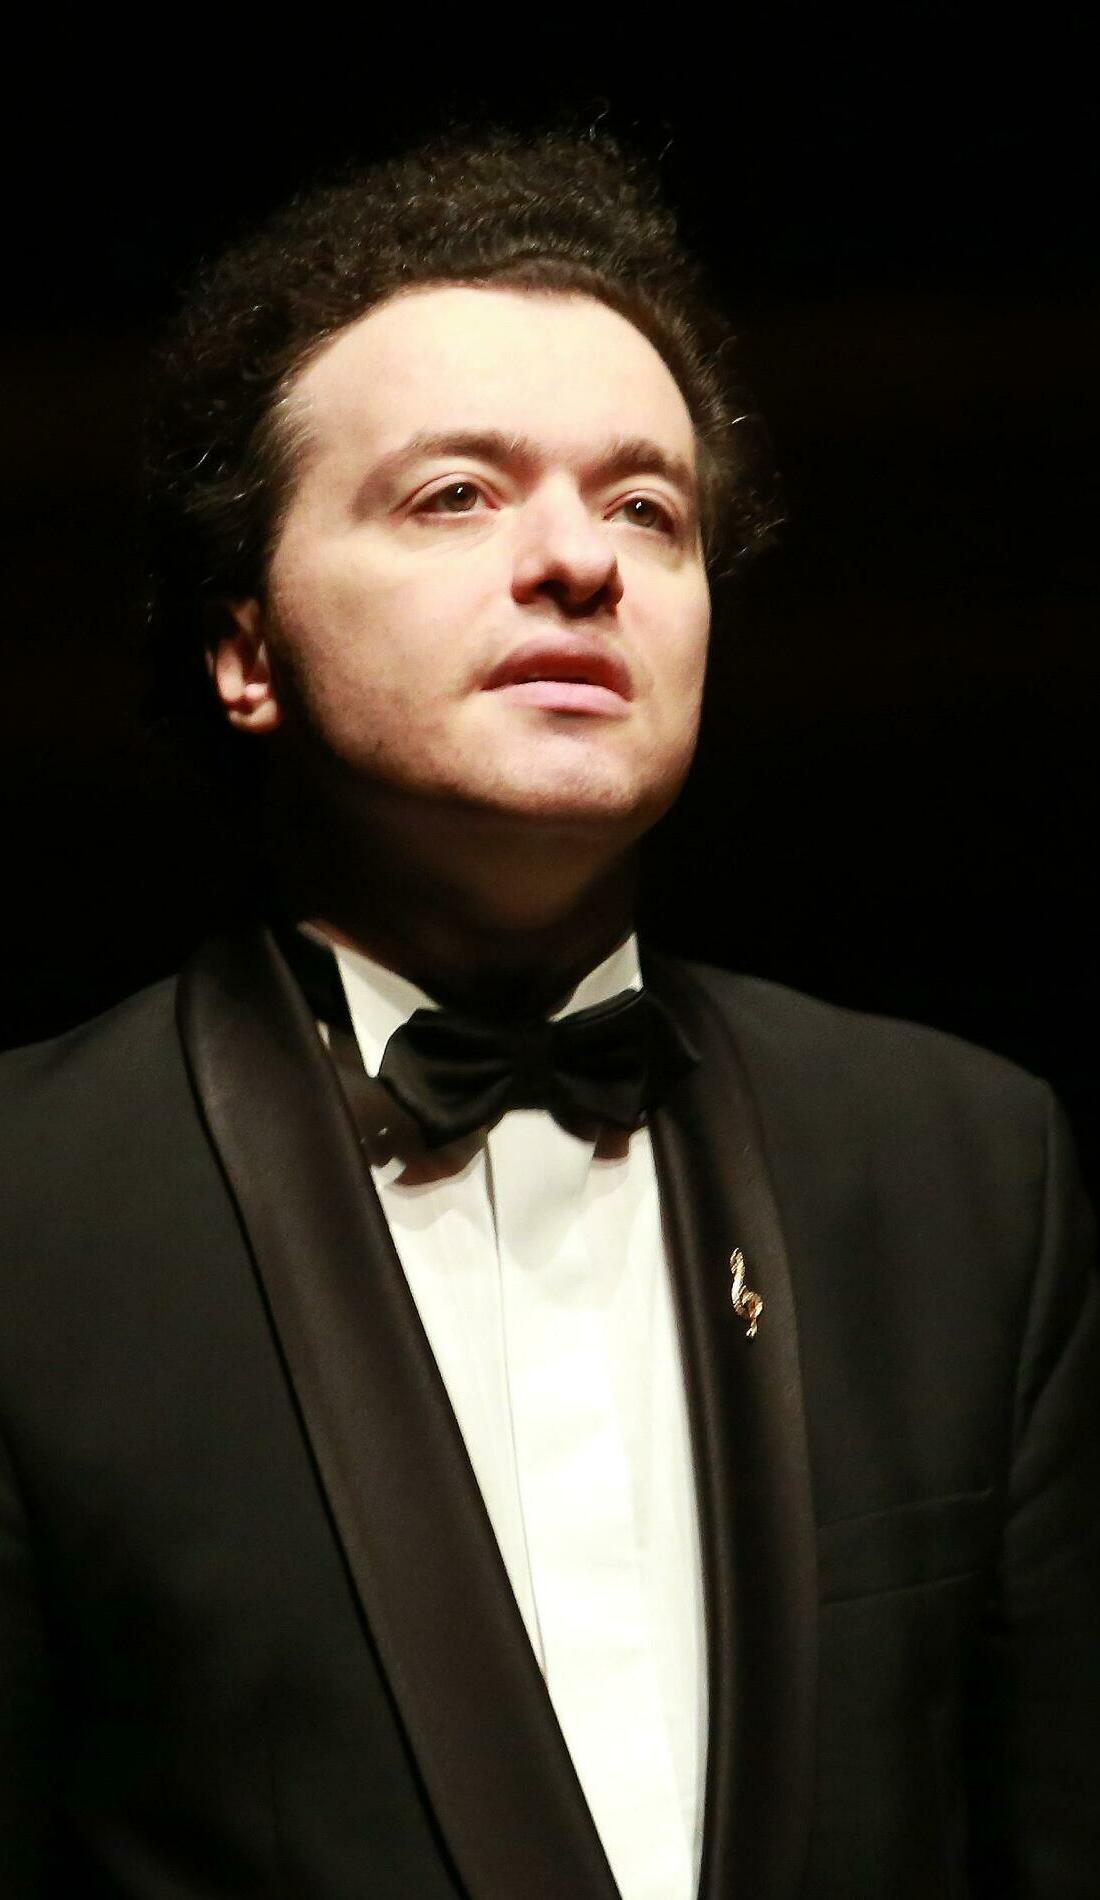 A Evgeny Kissin live event